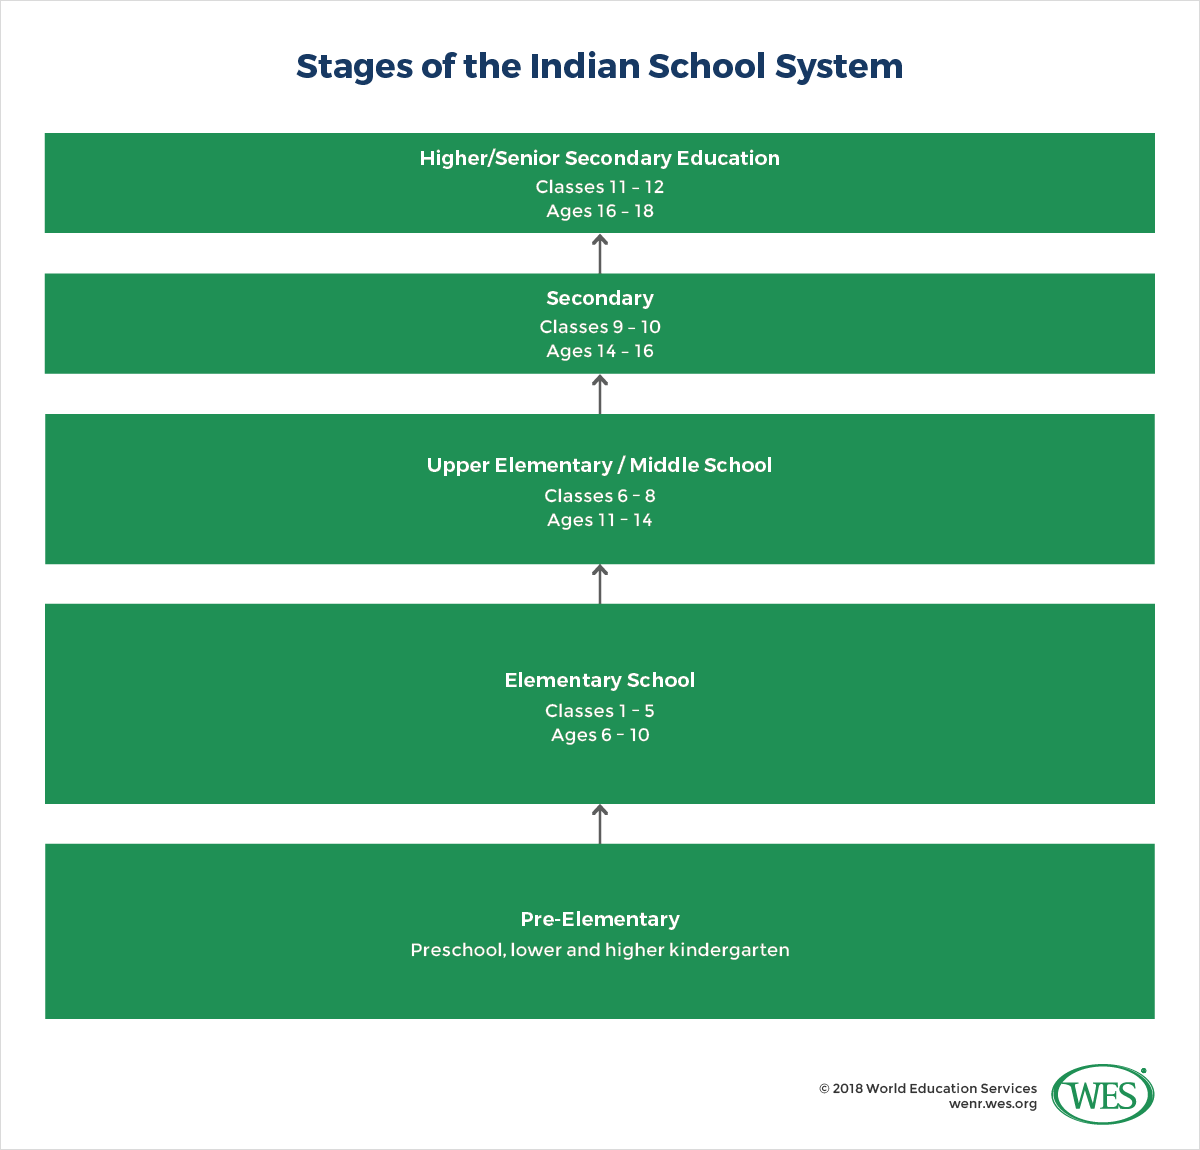 An infographic showing the stages of the Indian school system.